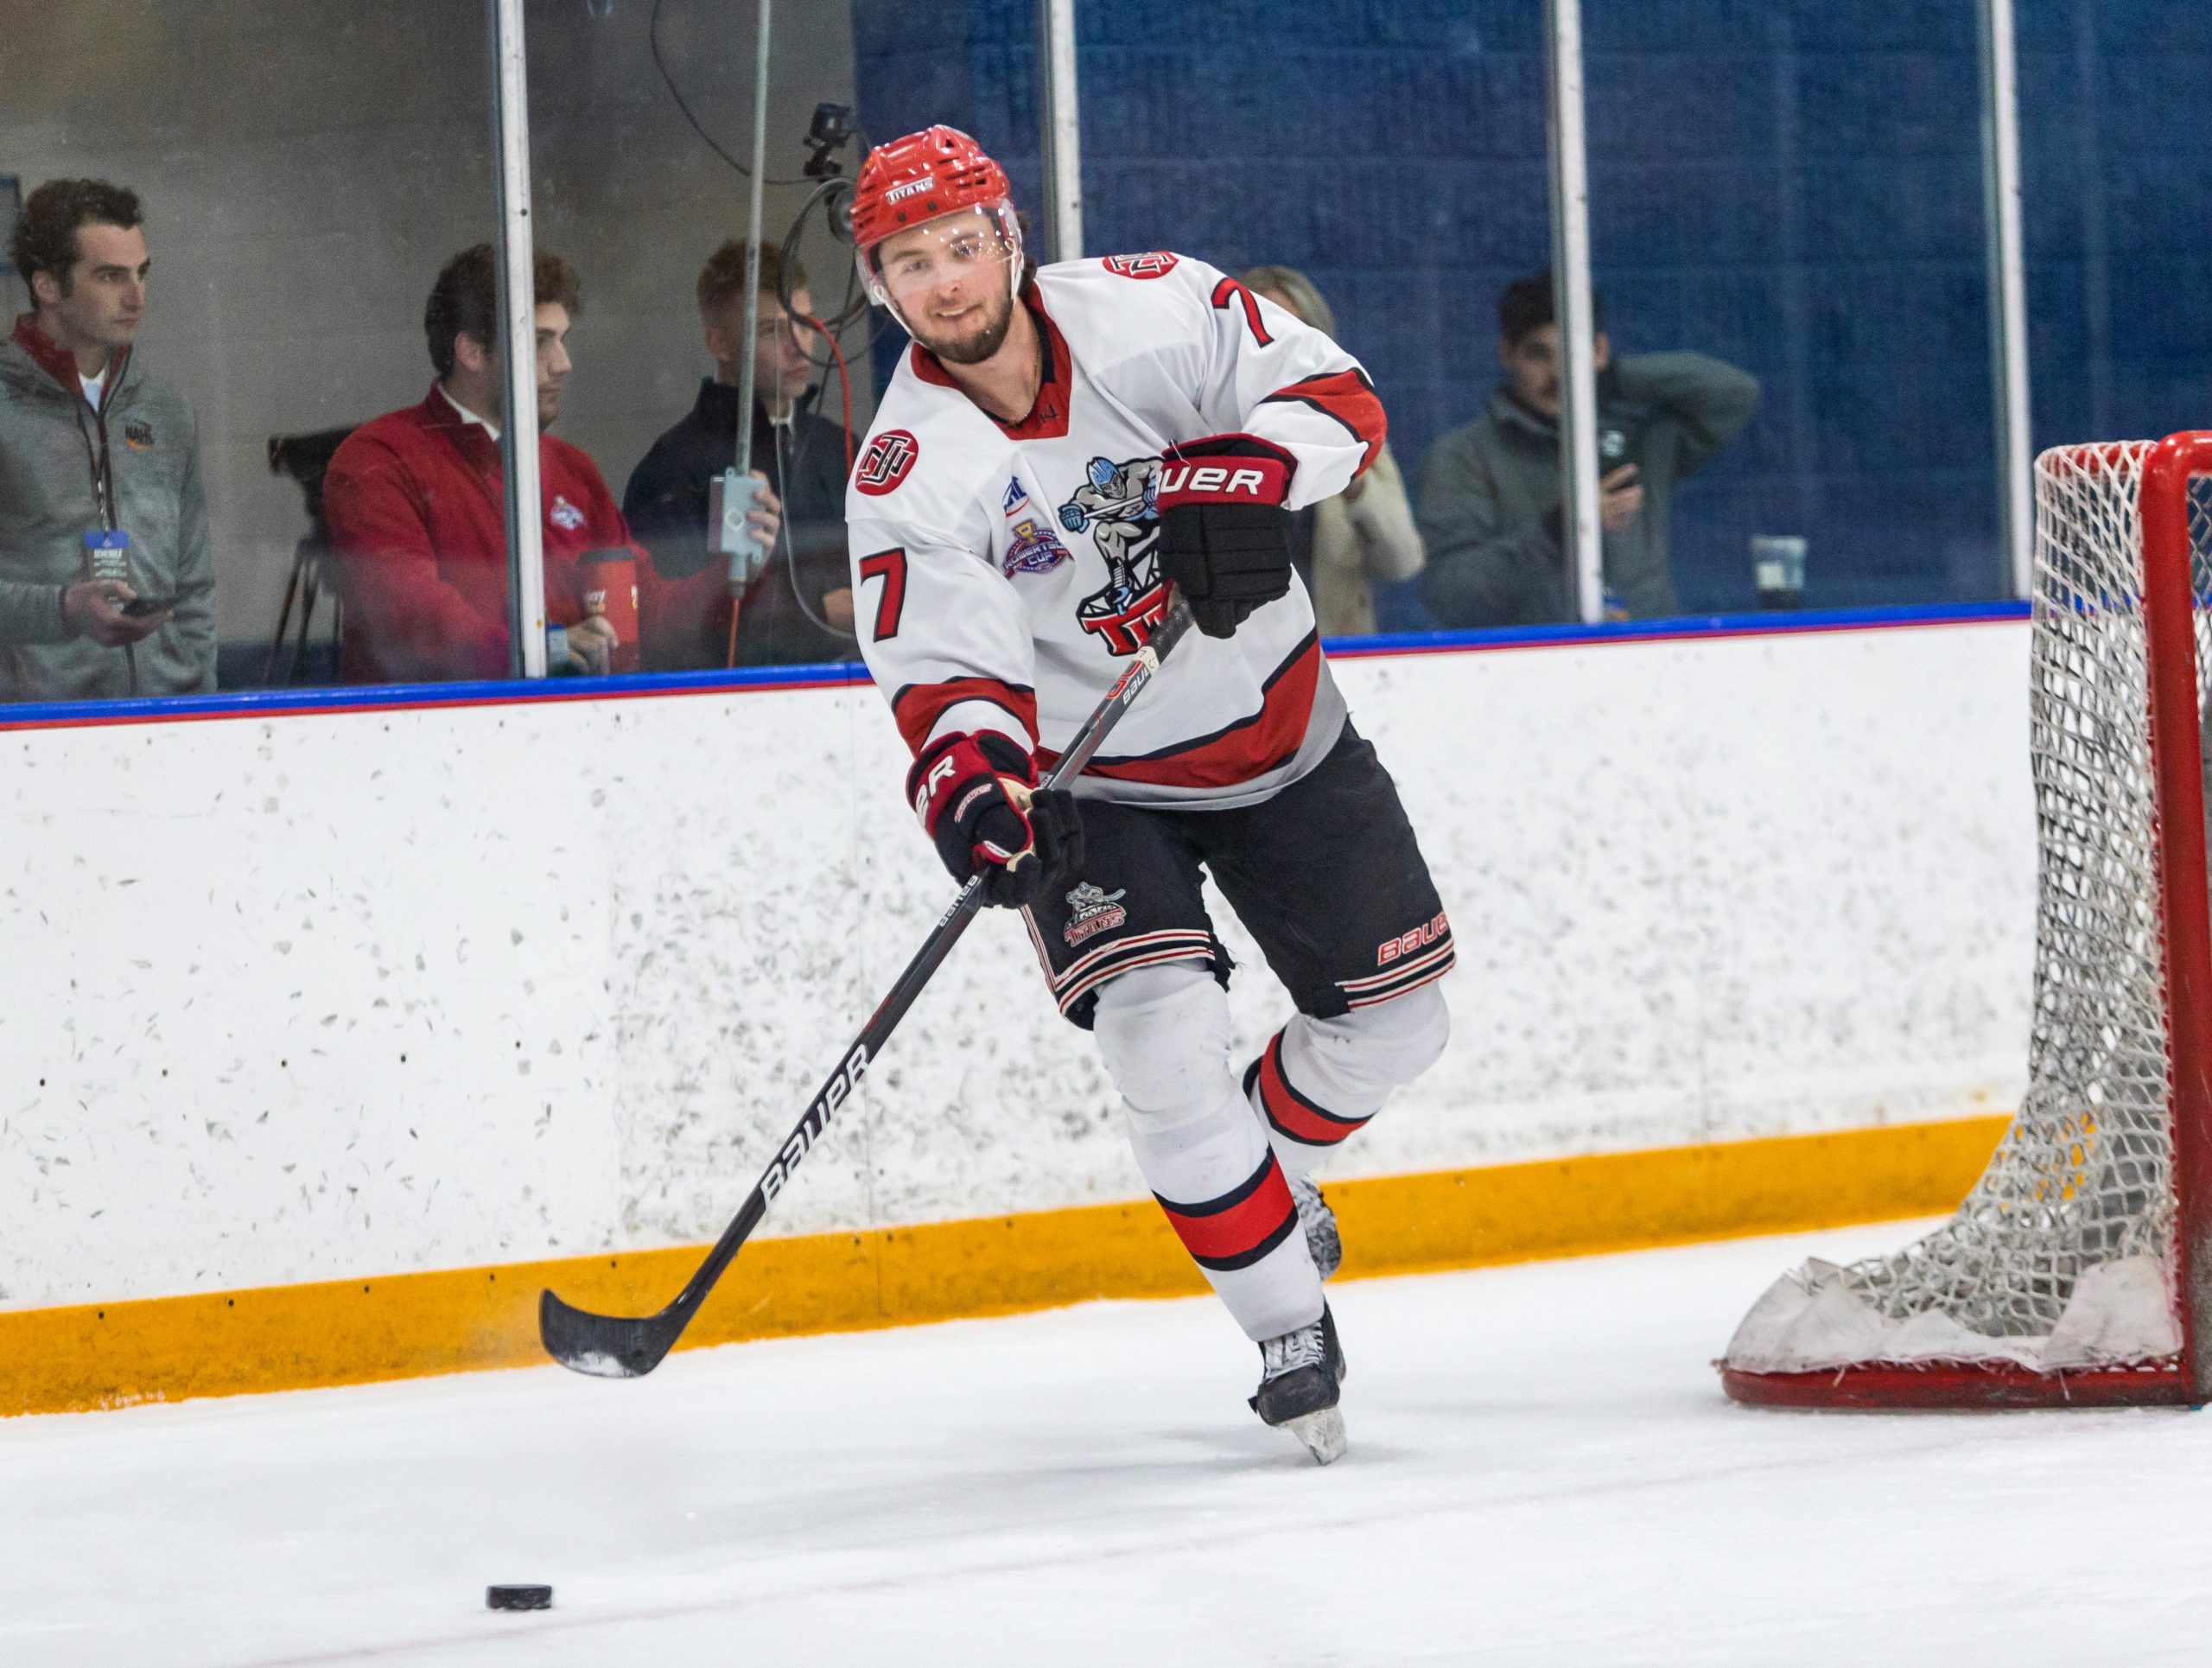 Titans Defenseman Anthony Mollica makes NCAA D1 commitment to St. Lawrence University